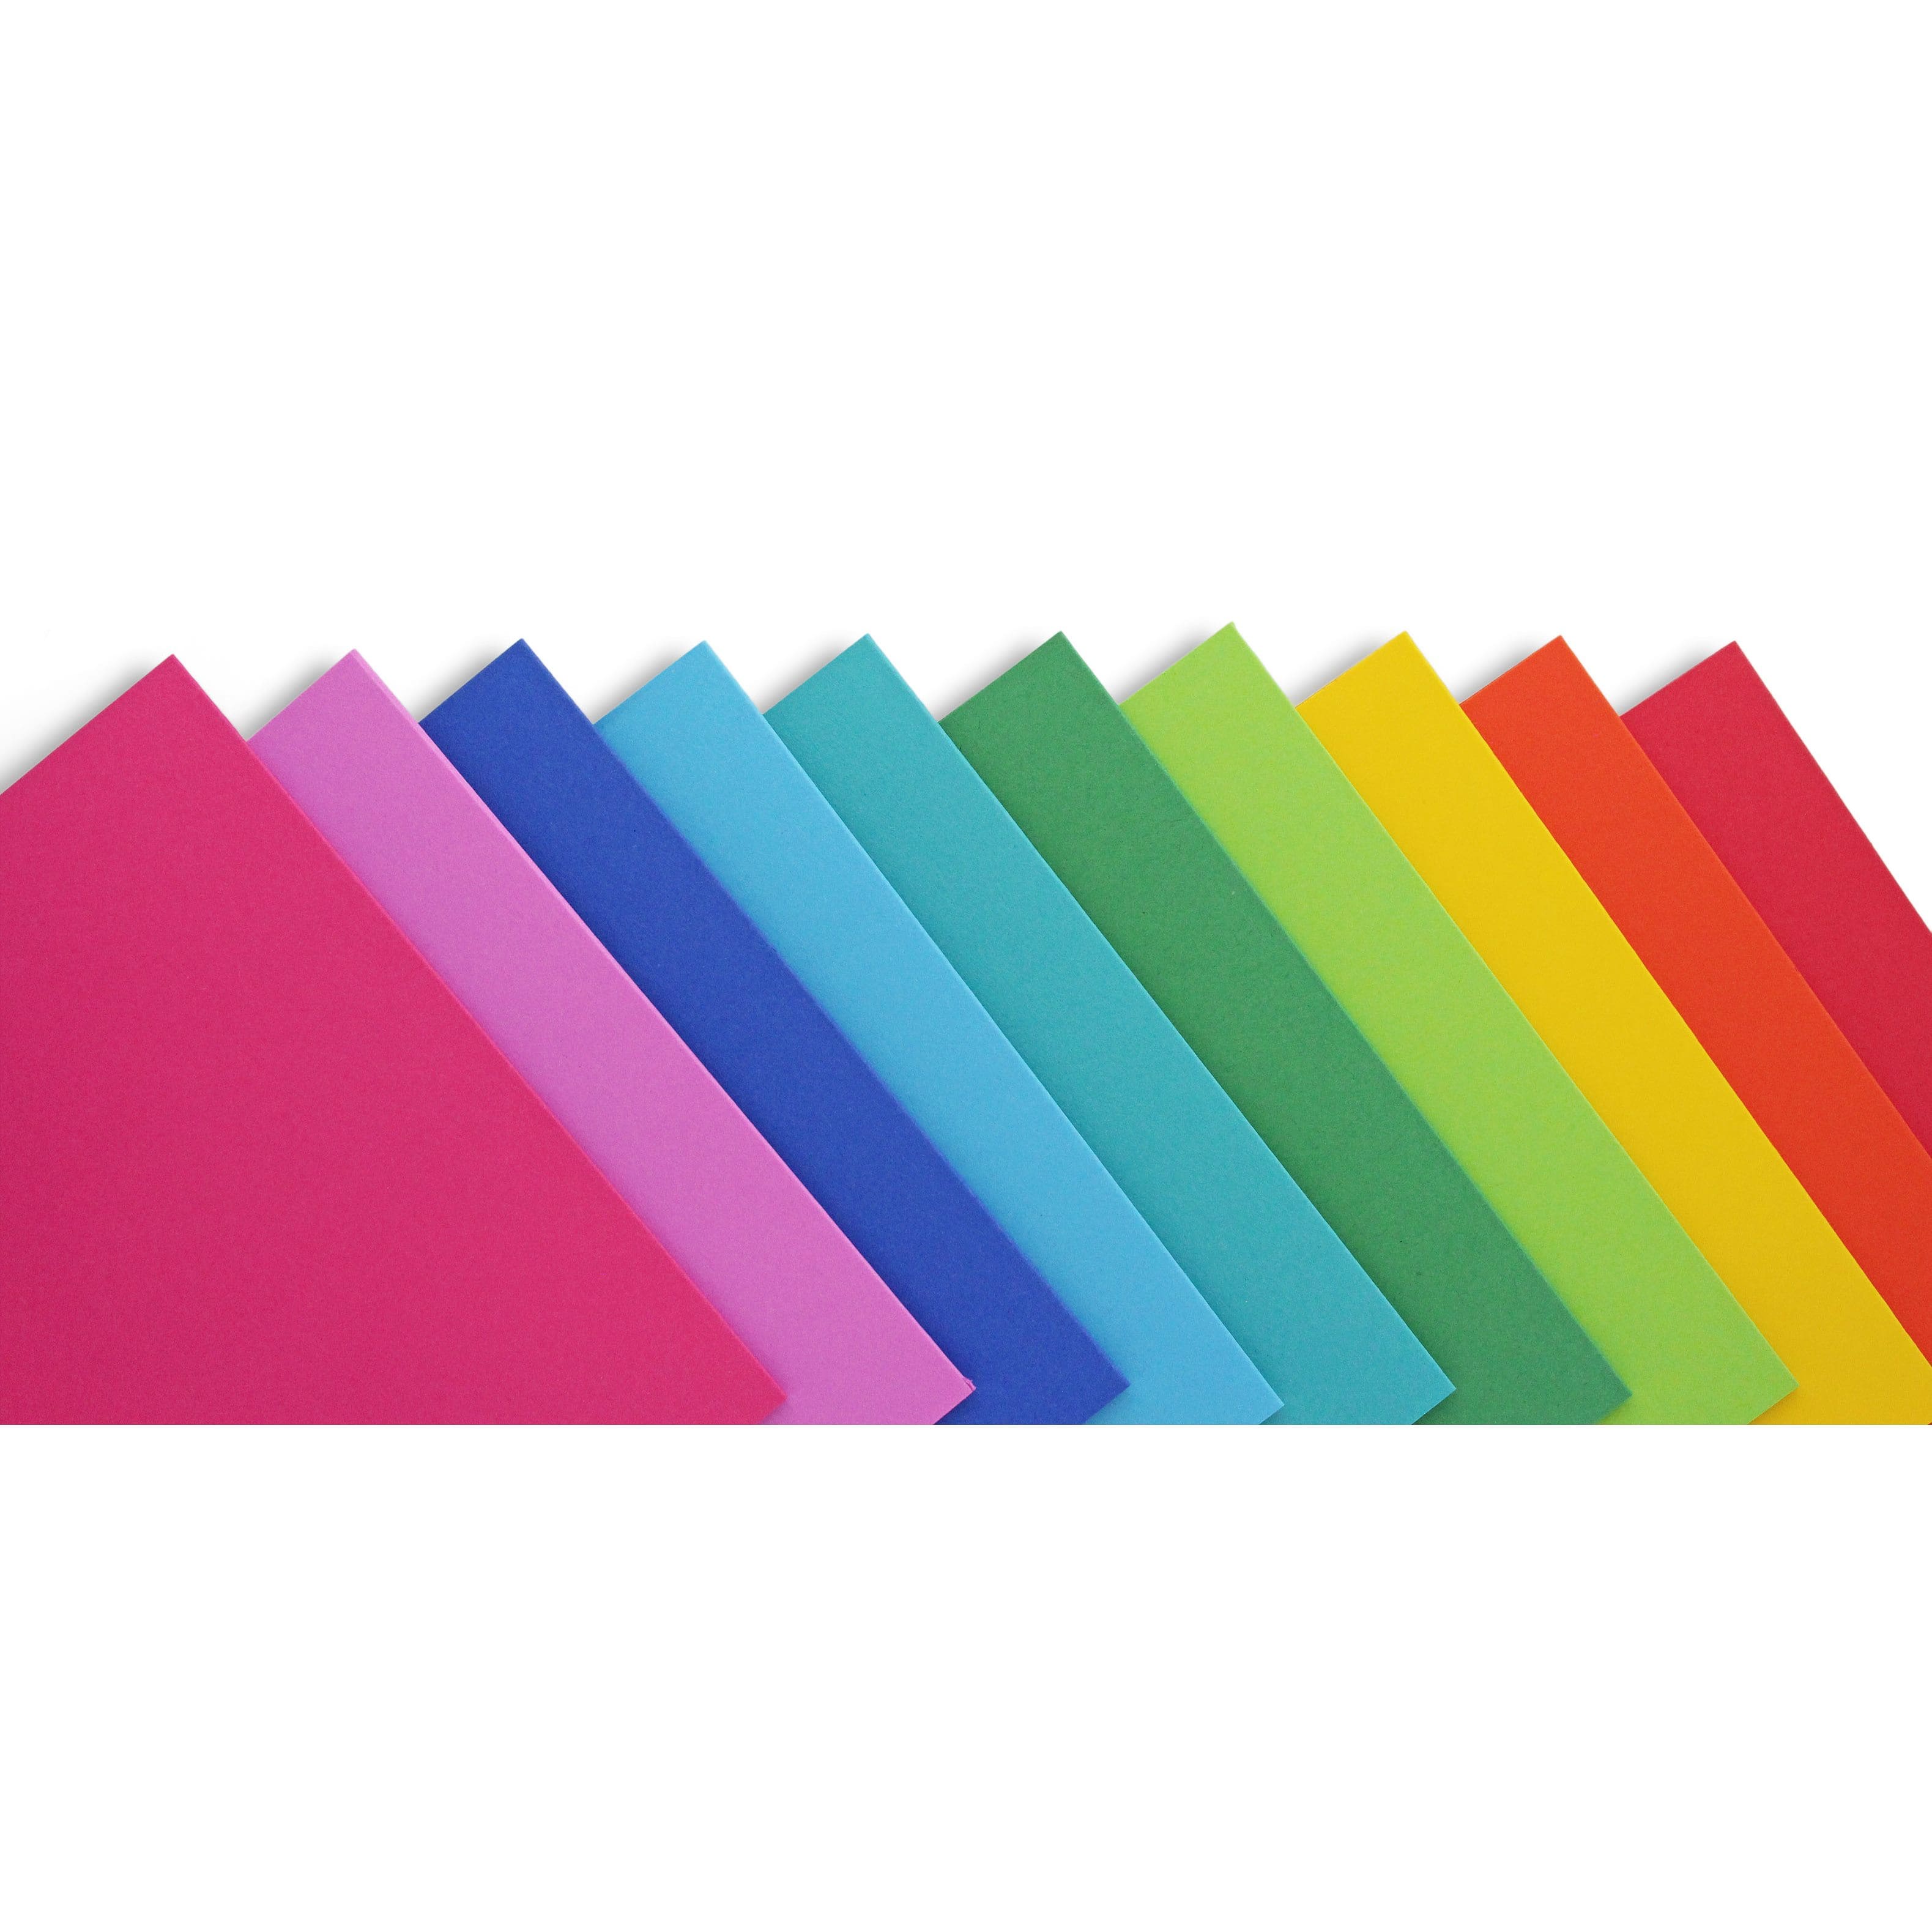 PA Paper&#x2122; Accents Smooth Bright Card &#x26; Envelope Set, 4.25&#x22; x 5.5&#x22;